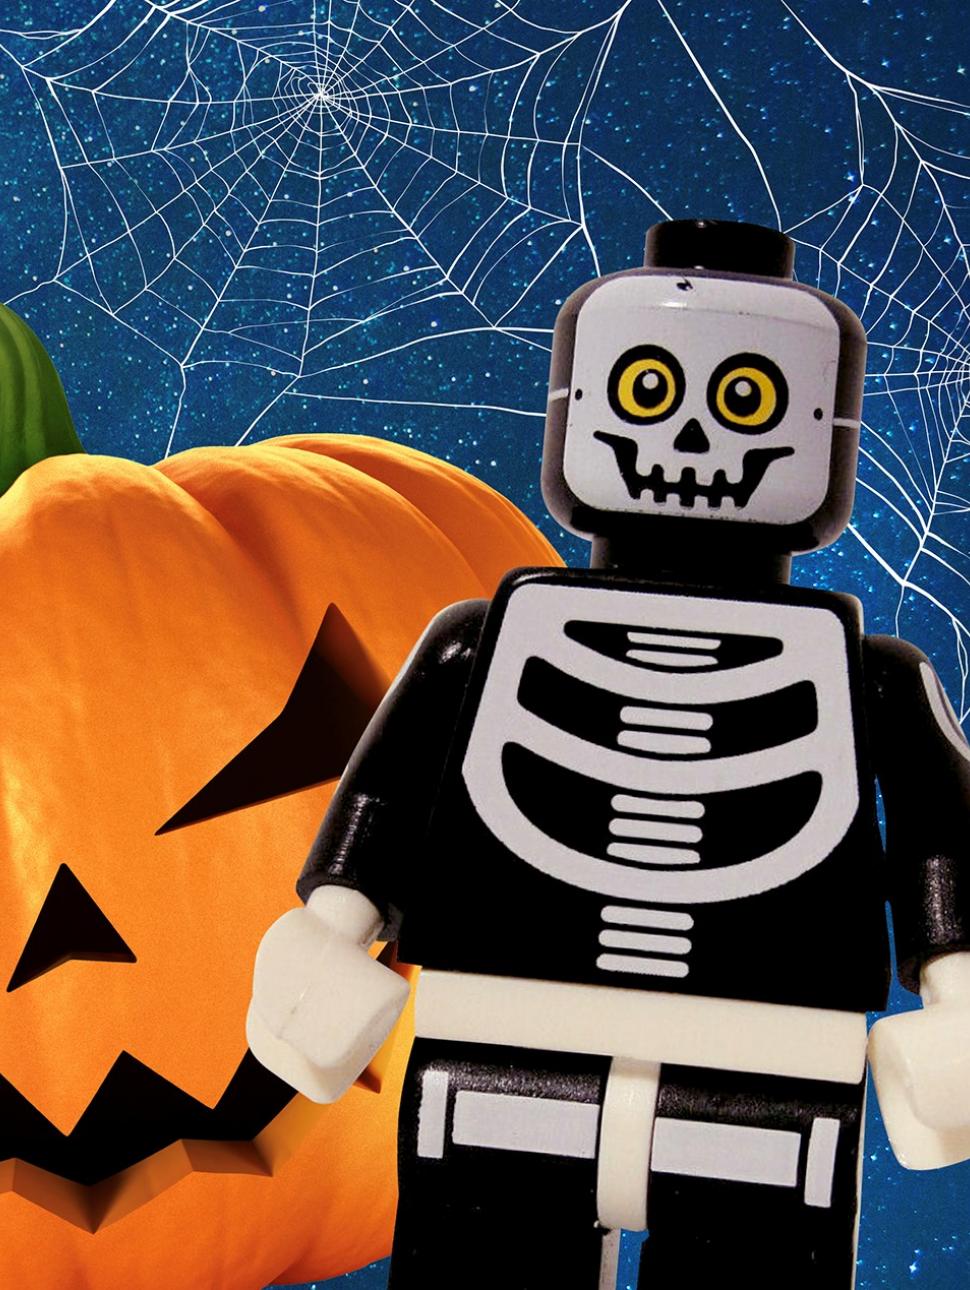 An image of a Halloween LEGO minifig character next to a carved out pumpkin